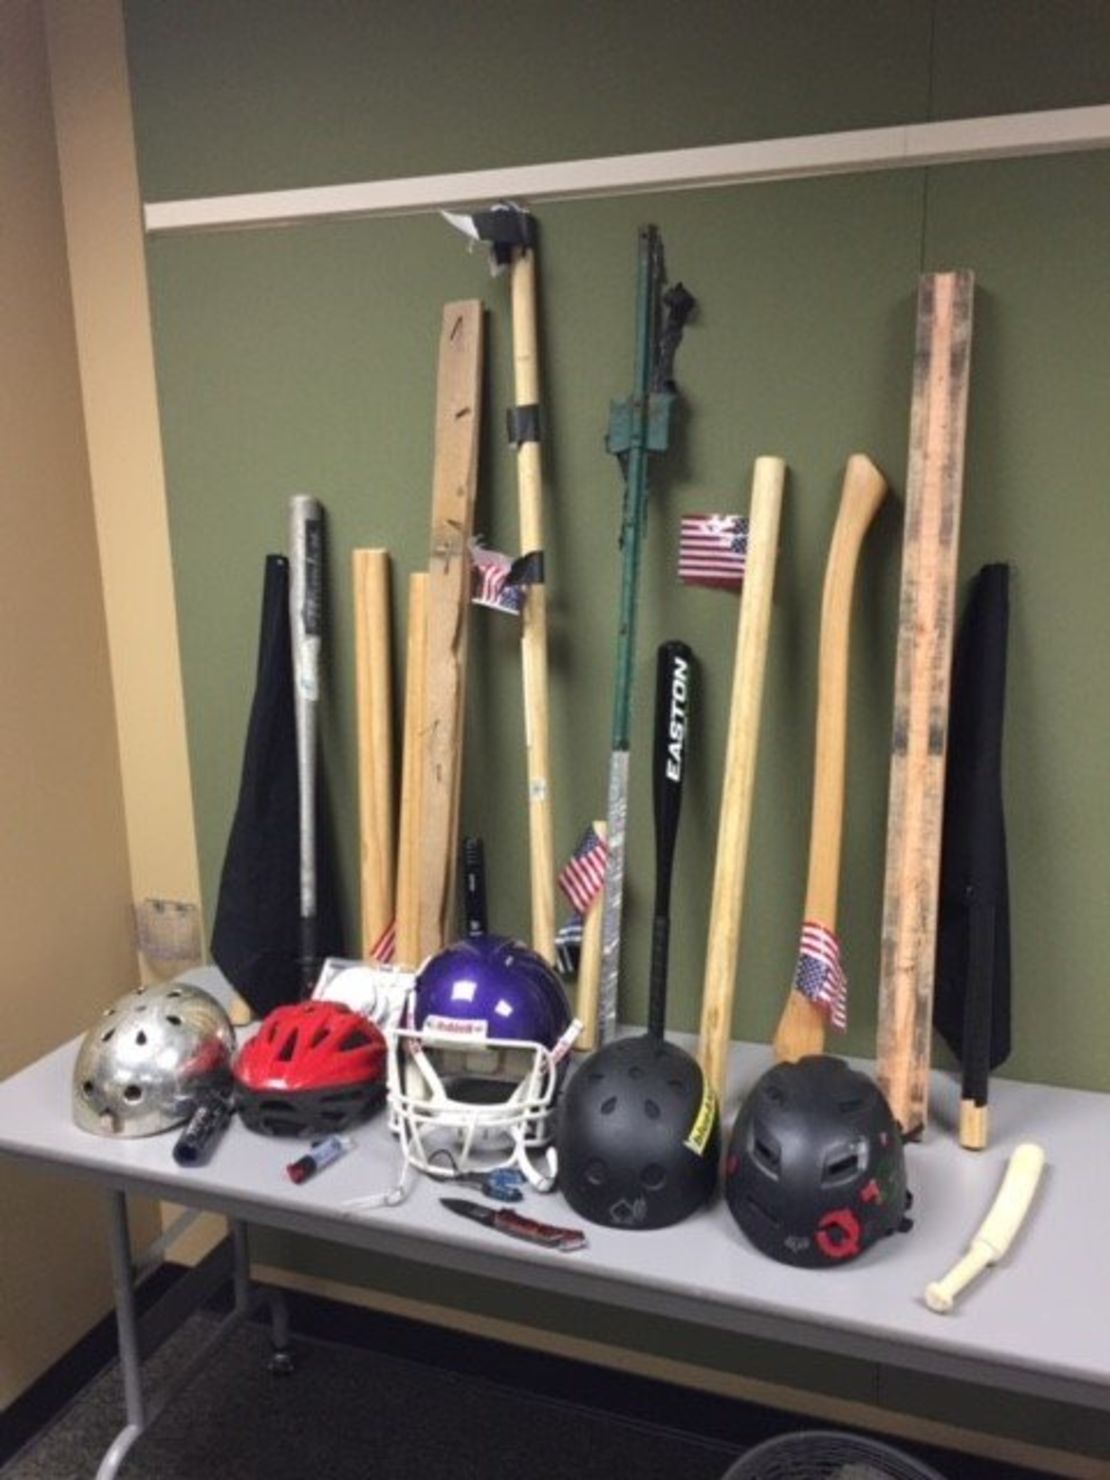 These are the weapons that were confiscated during Trump rally in Berkeley, CA.